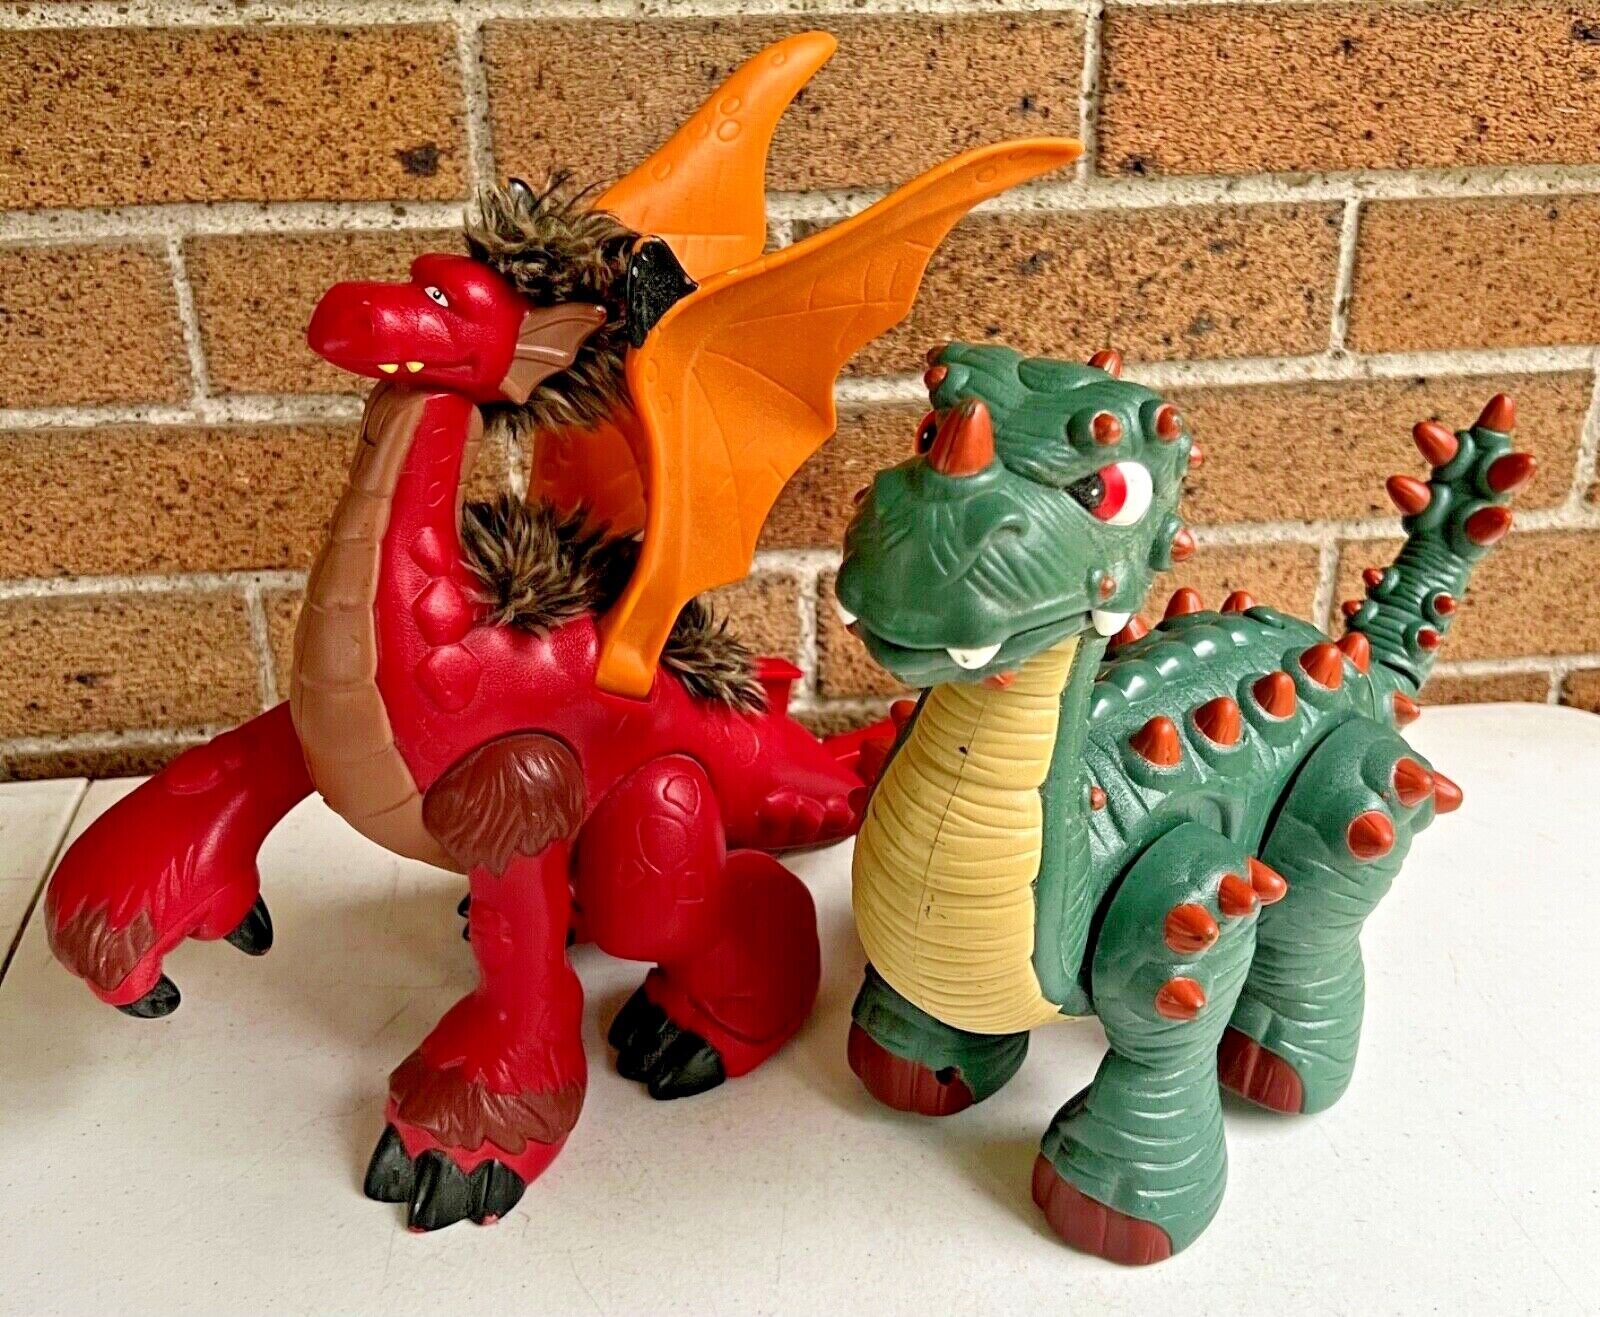 (2) 2008 Mattel Imaginext Dinosaurs SPIKE & RED Dragon…both tested & working - $30.00